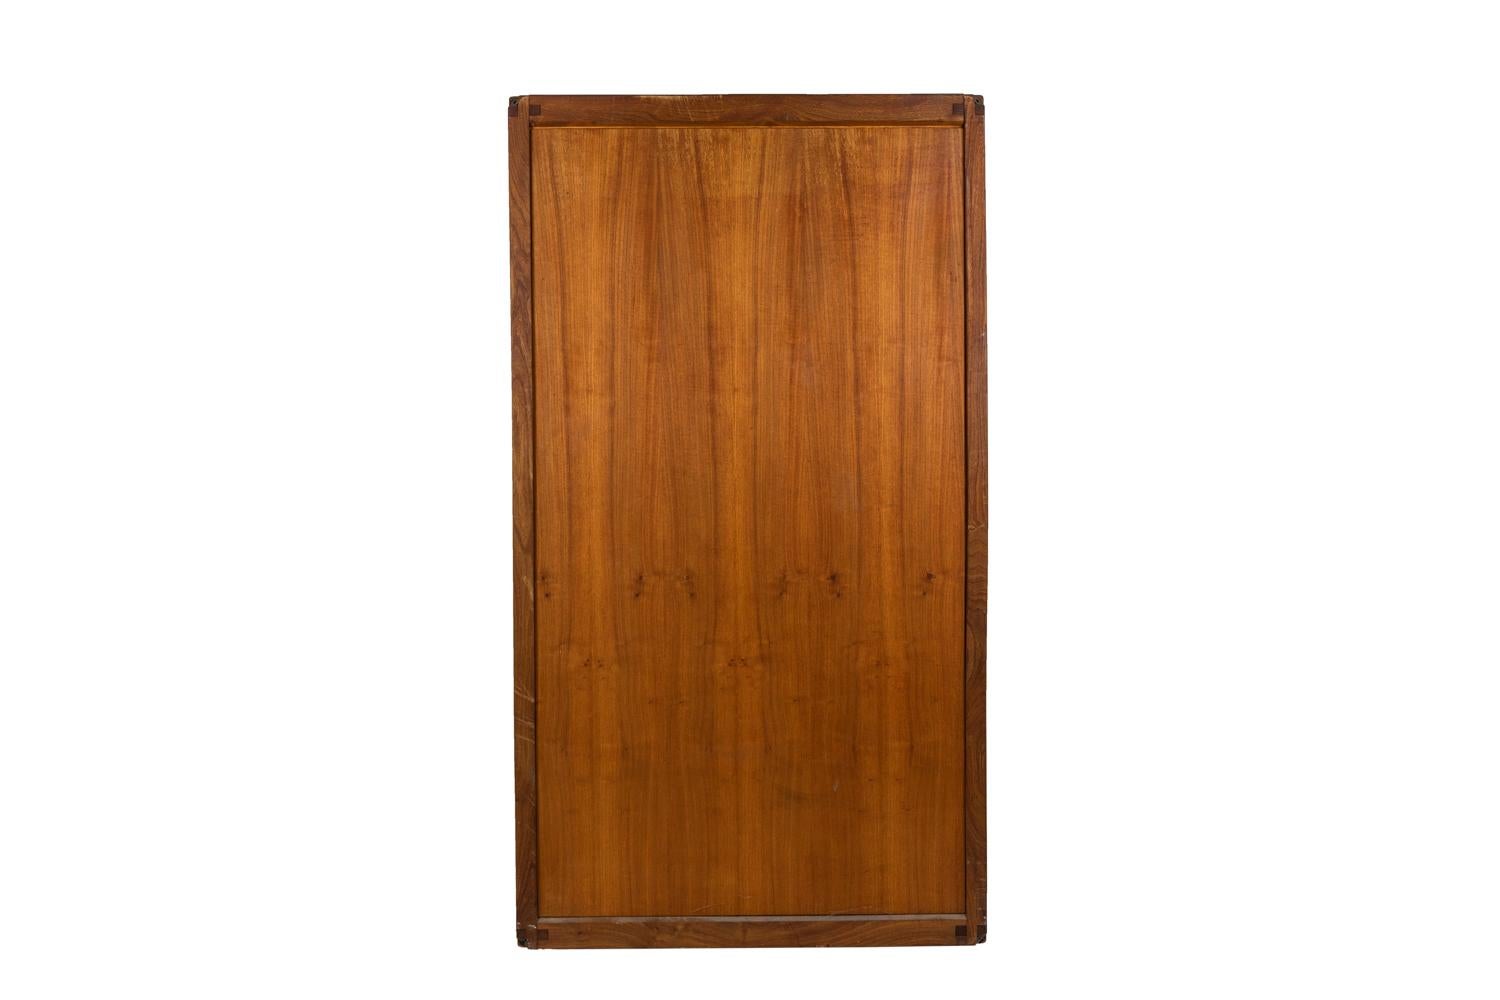 Pierre Chapo, signed.

Rectangular wardrobe in natural elm. It opens by two door and lets appear a metal bar and a board lifting thanks to a cremona and tassel system.

French work realized in 1979.

Model B10.

Source: Hugues Magen (dir.),